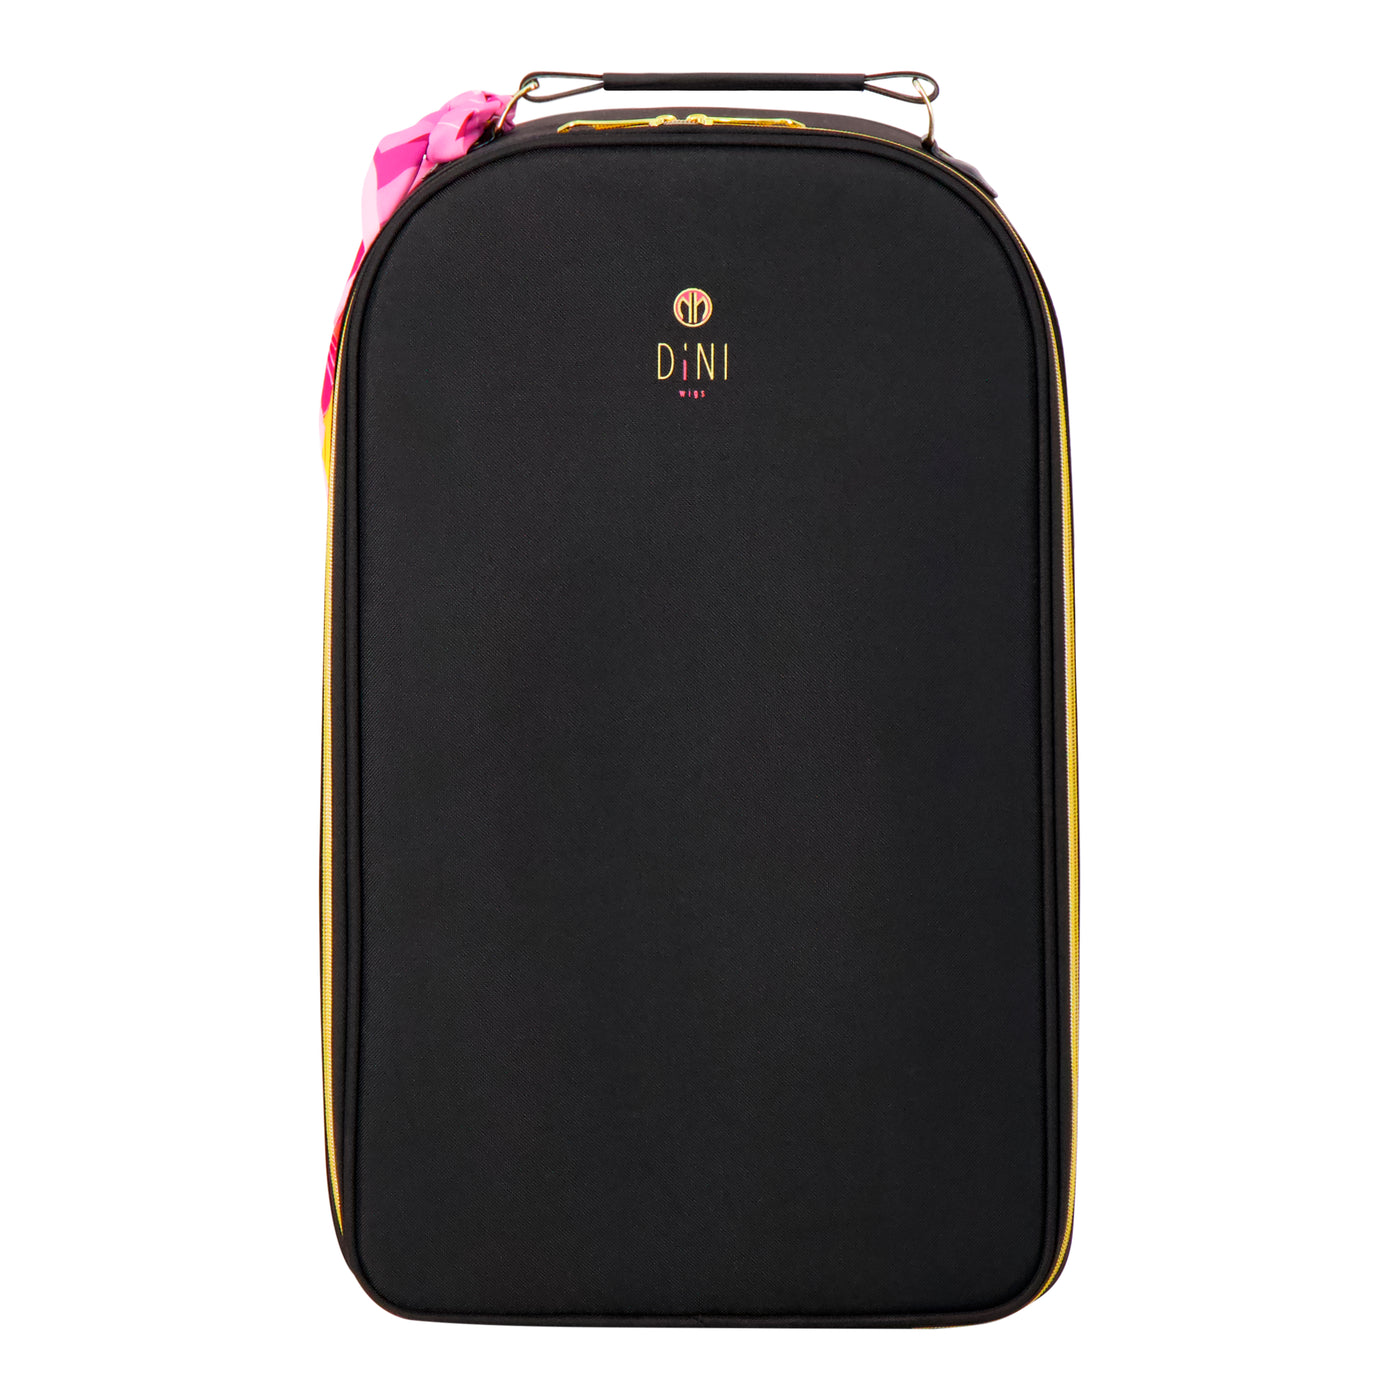 The Dini Travel Case in LARGE 21"